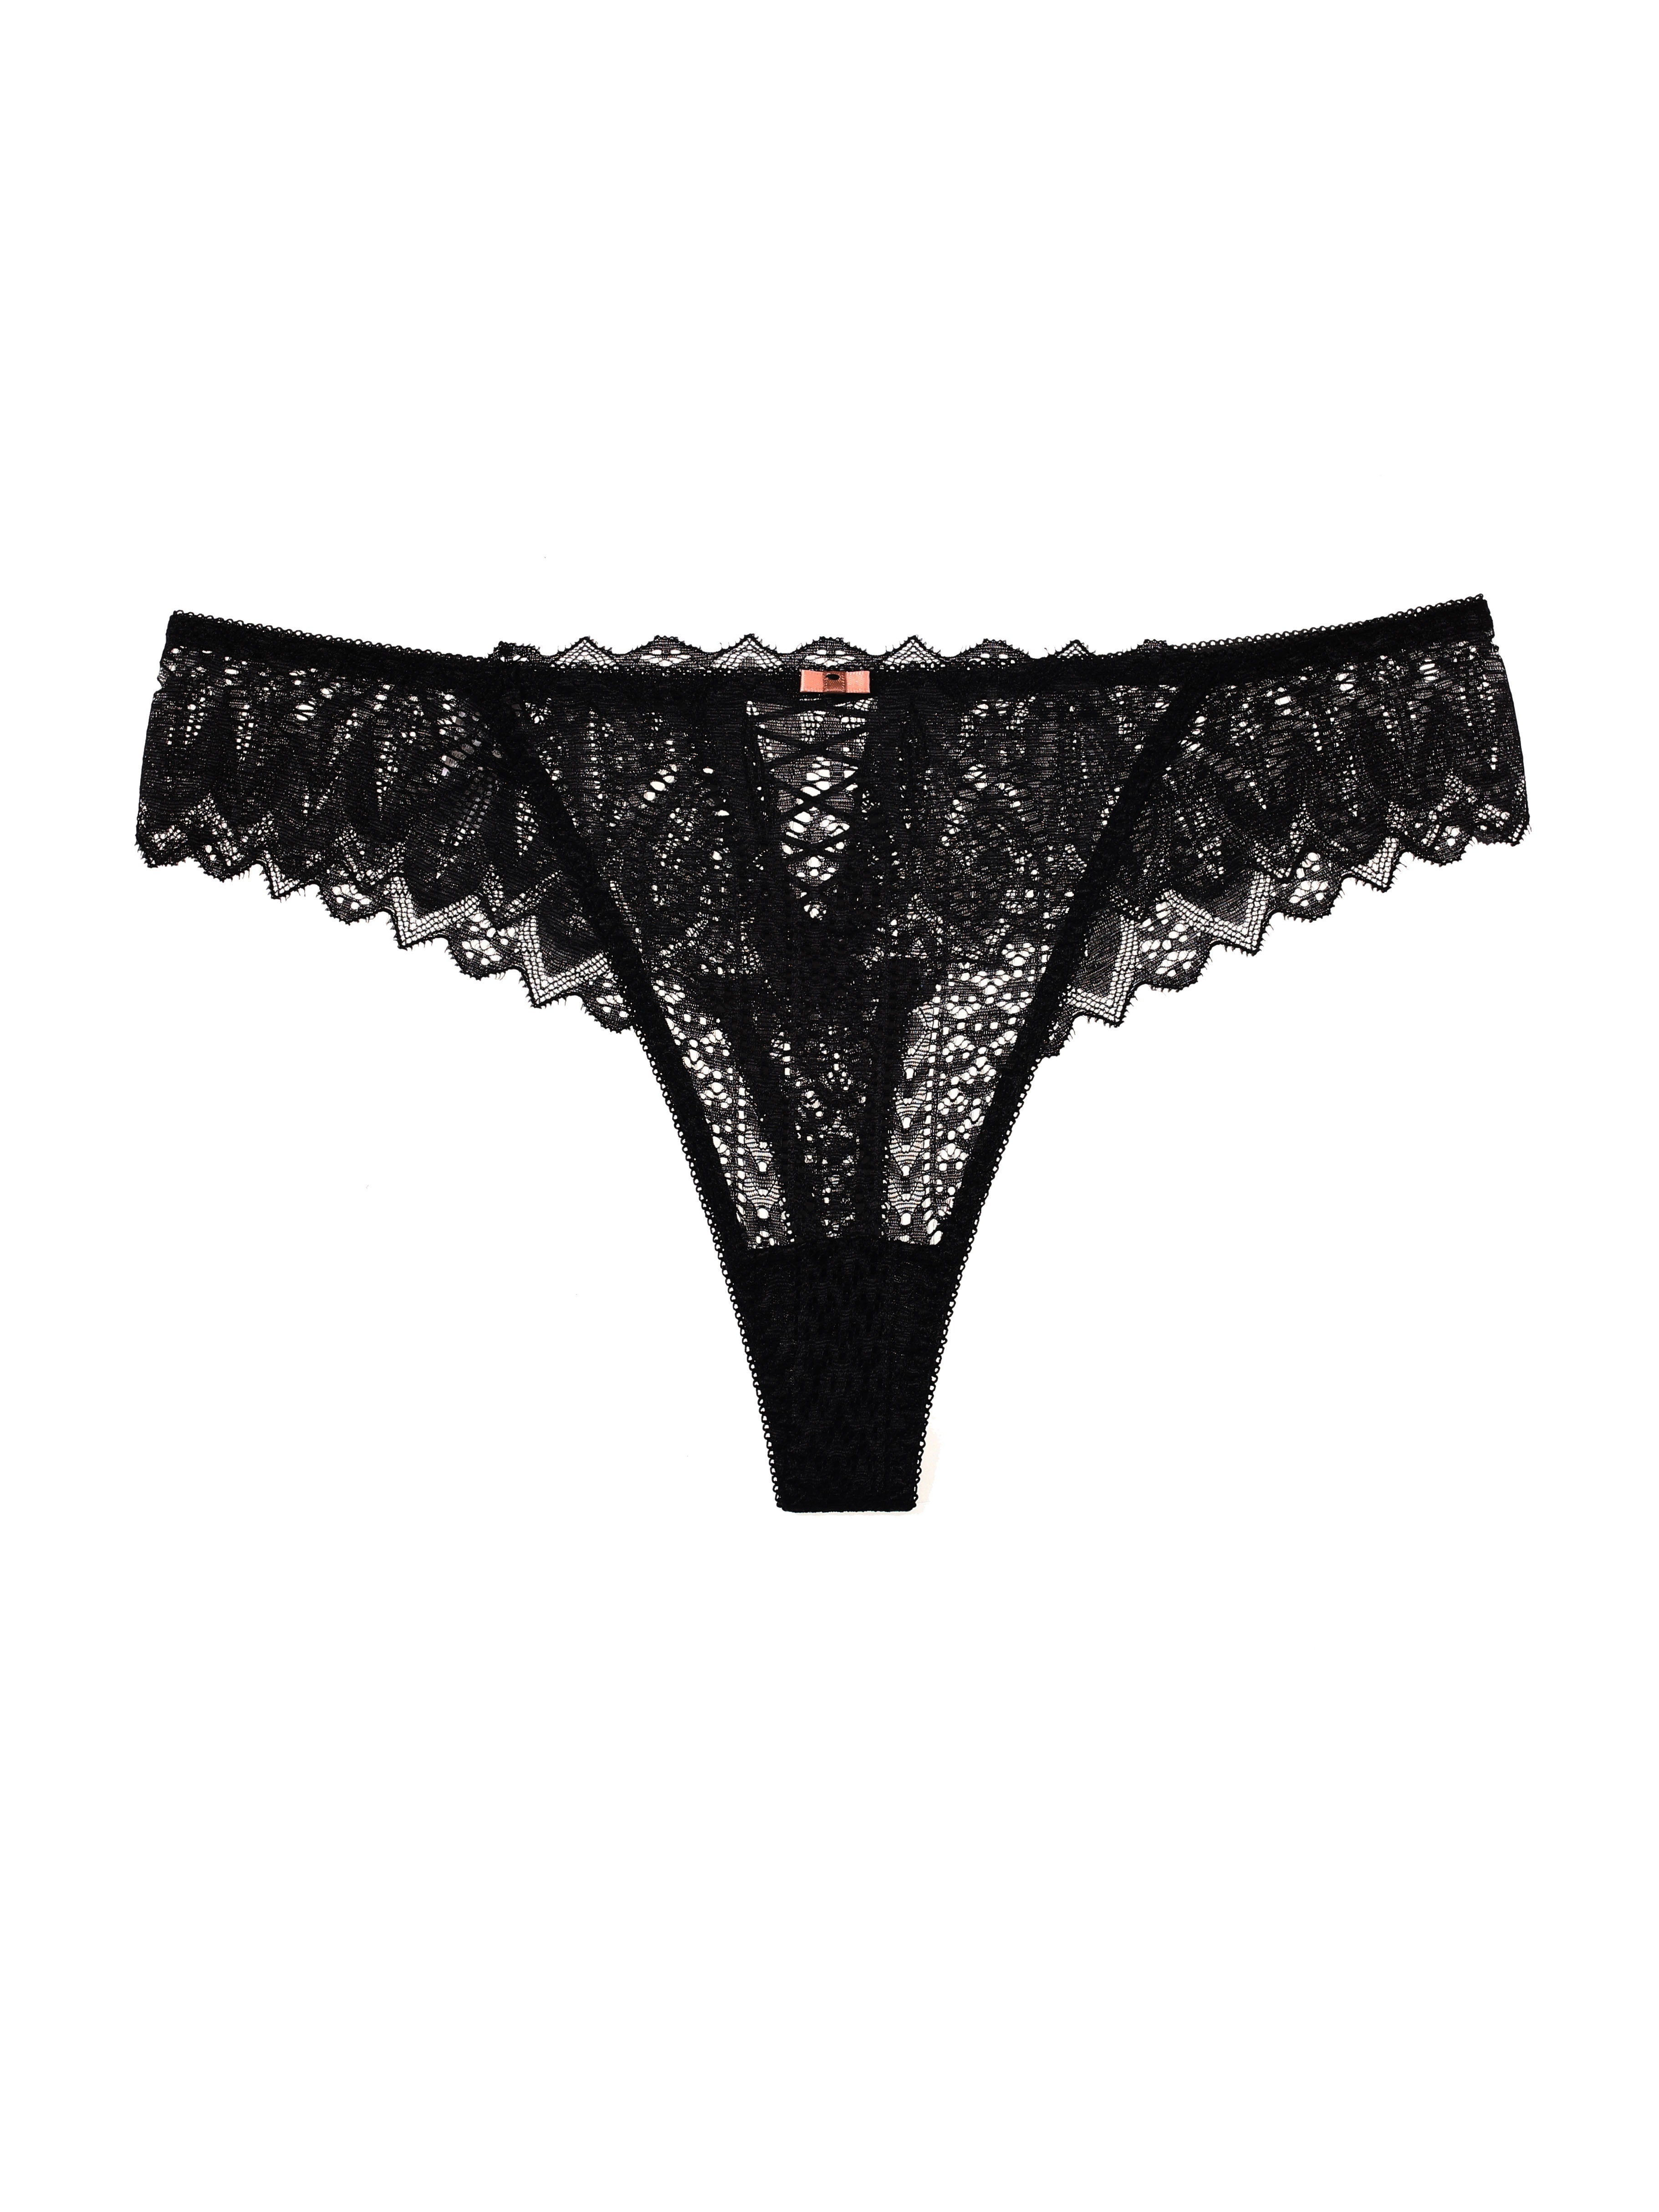 Qertyioot Womens Elegant Lace See-Through Breathable Thongs Underwear